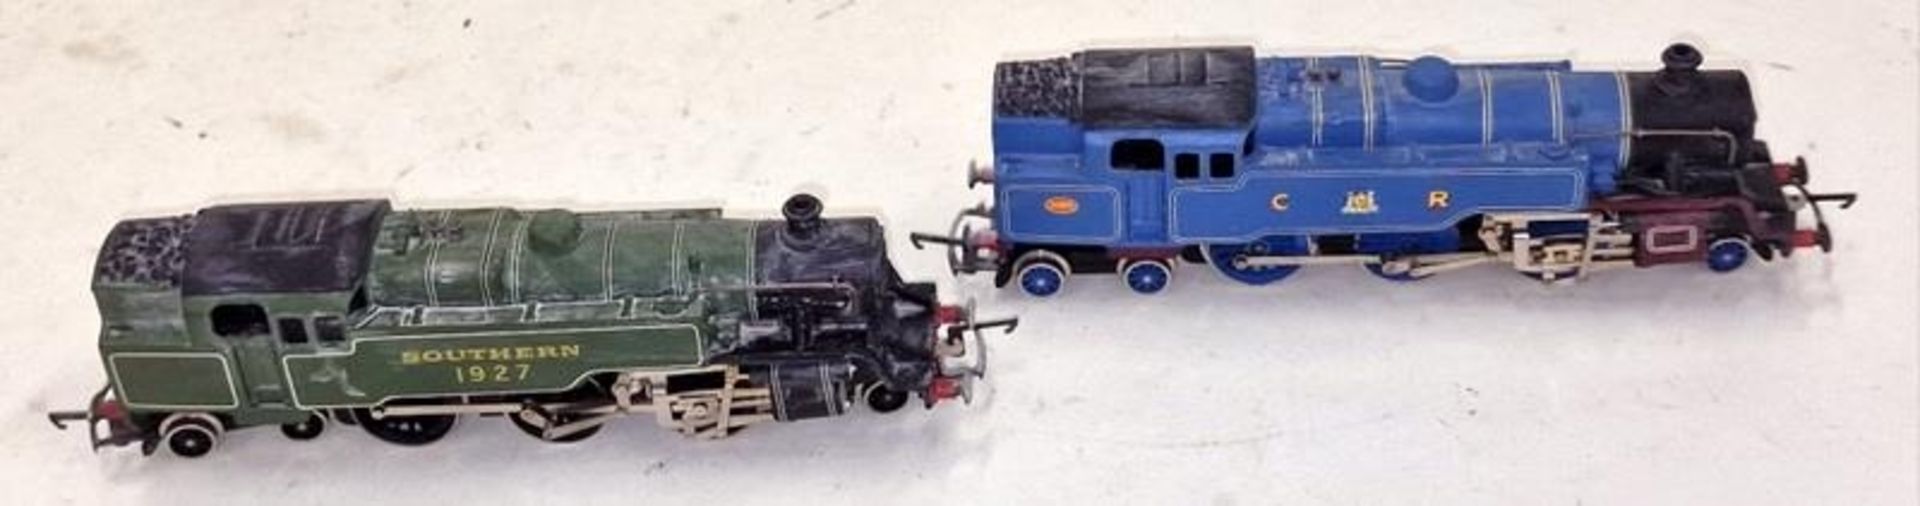 Two OO Gauge locomotives to include Southern 1927 and C R 2085- previously displayed so require a - Image 3 of 4